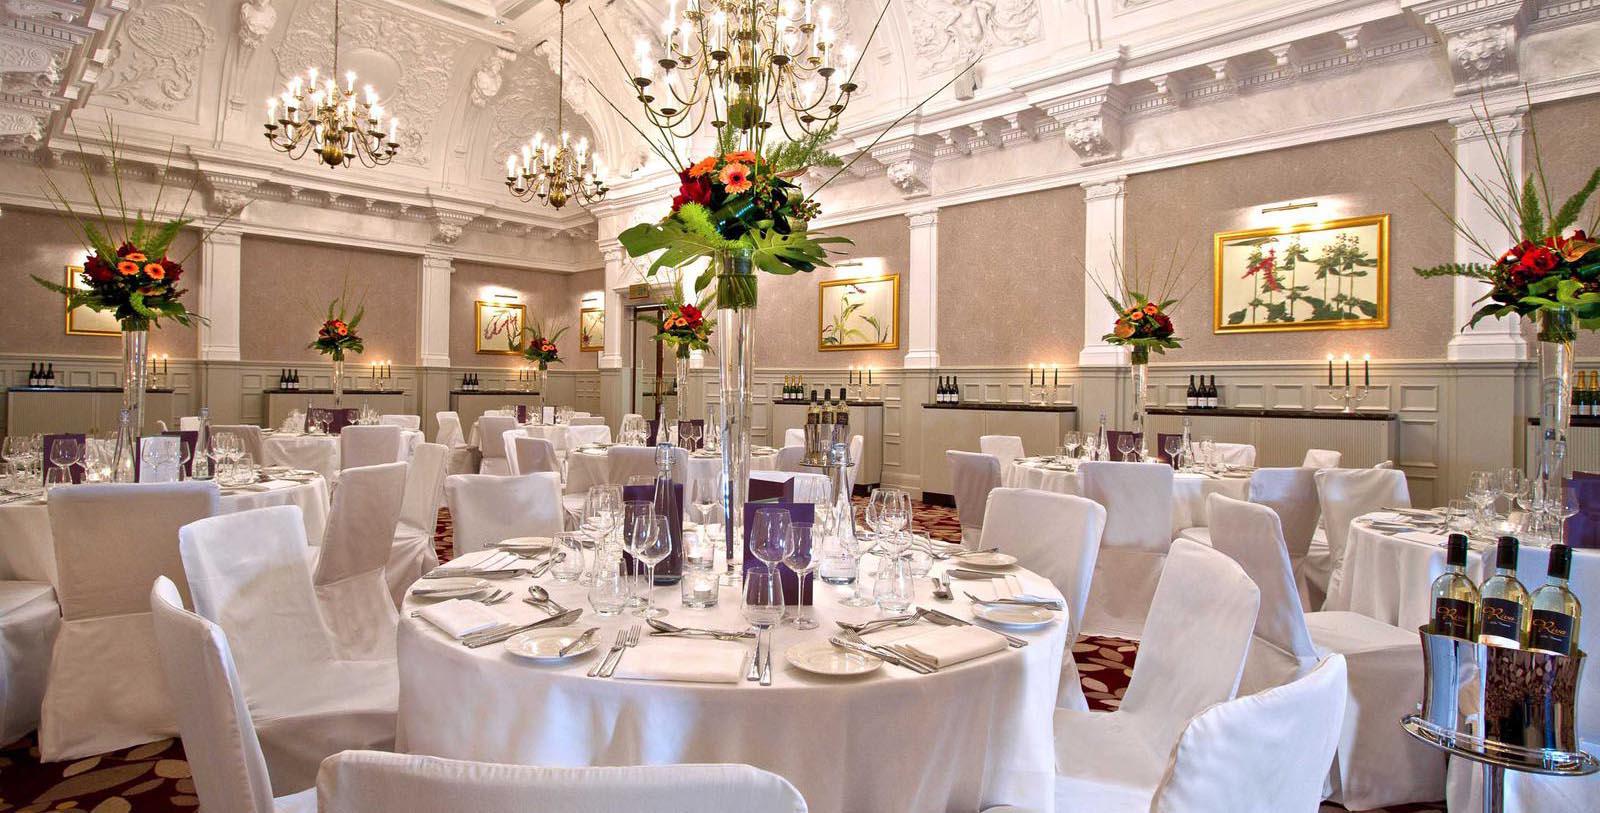 Image of Cloisters Suite St. Ermin's Hotel in London, England, United Kingdom